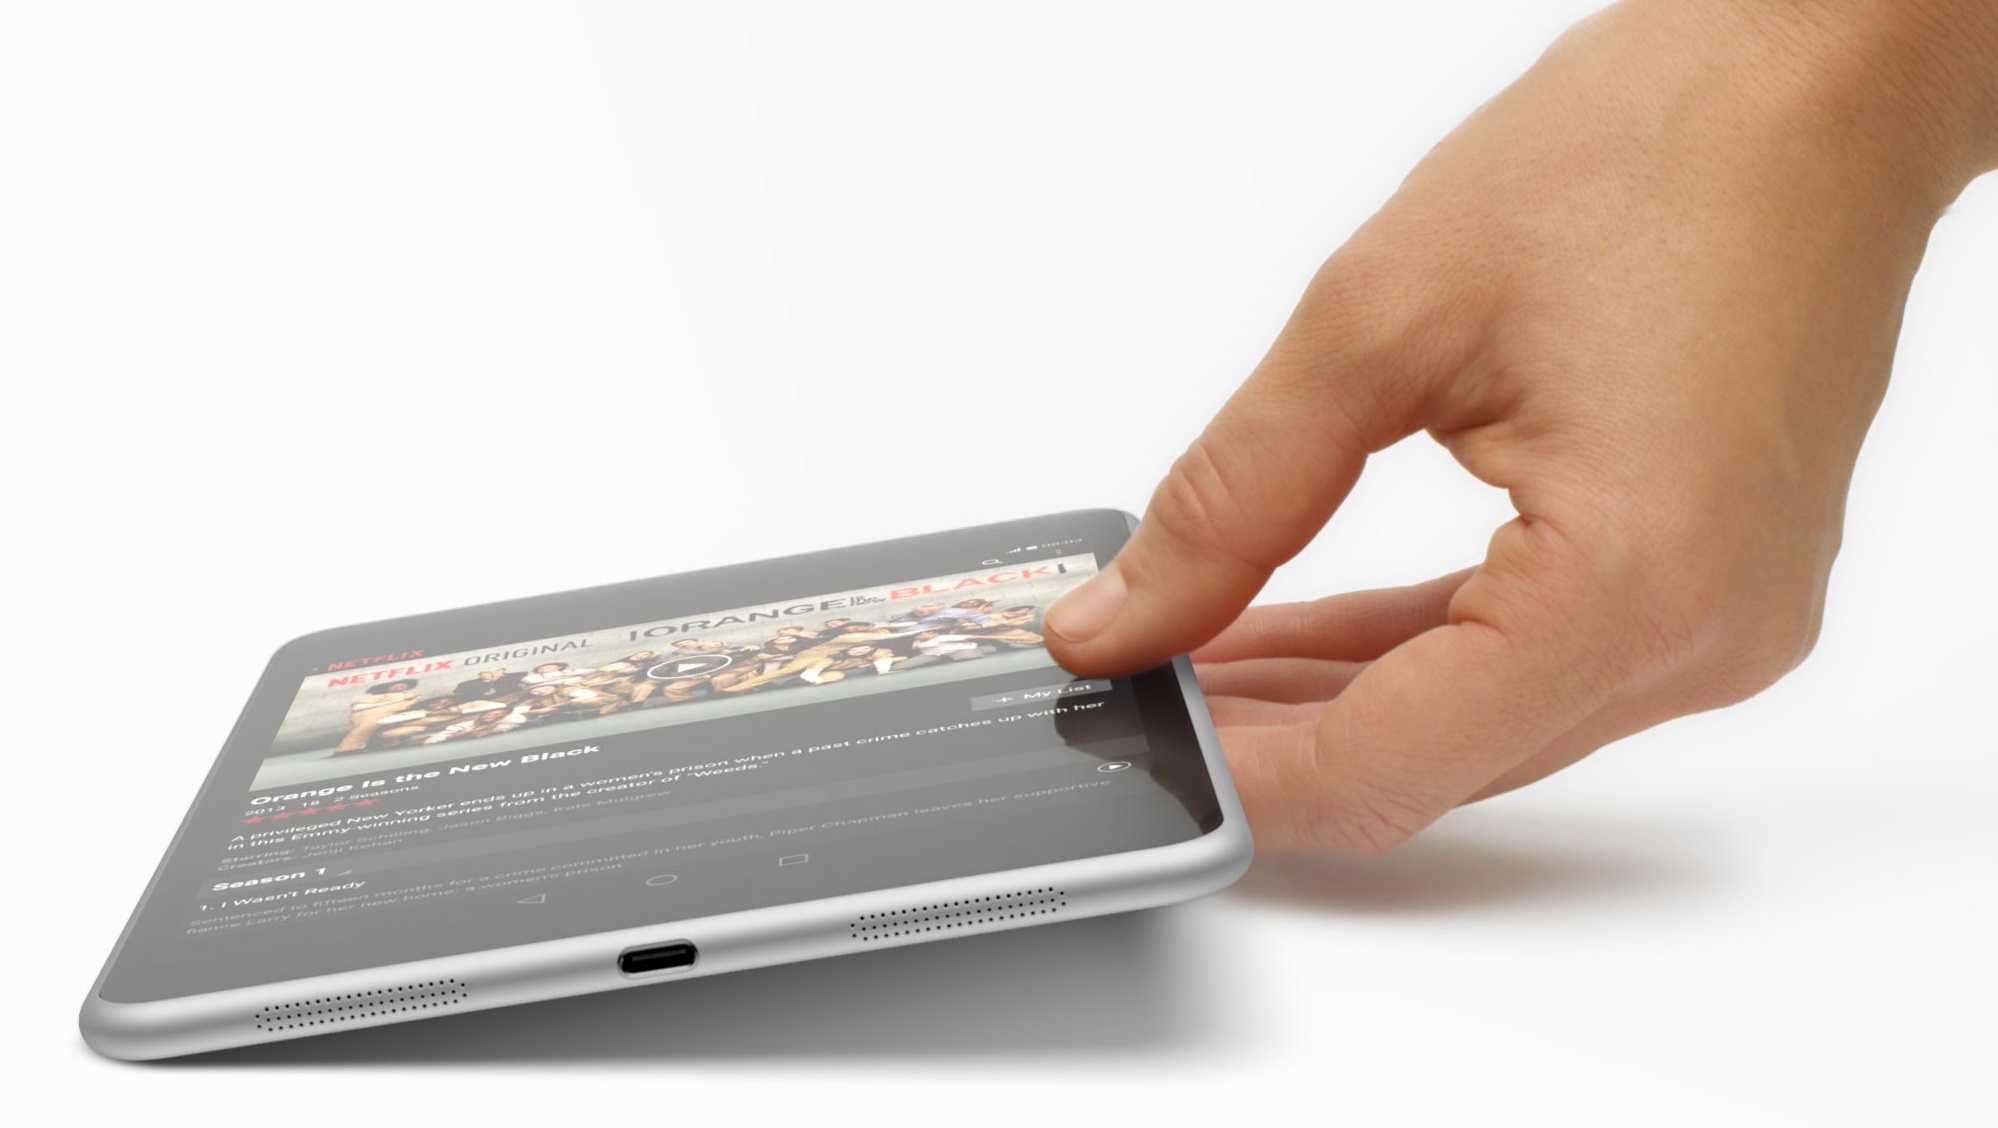 Nokia launches an Android tablet, with smartphones likely ...
